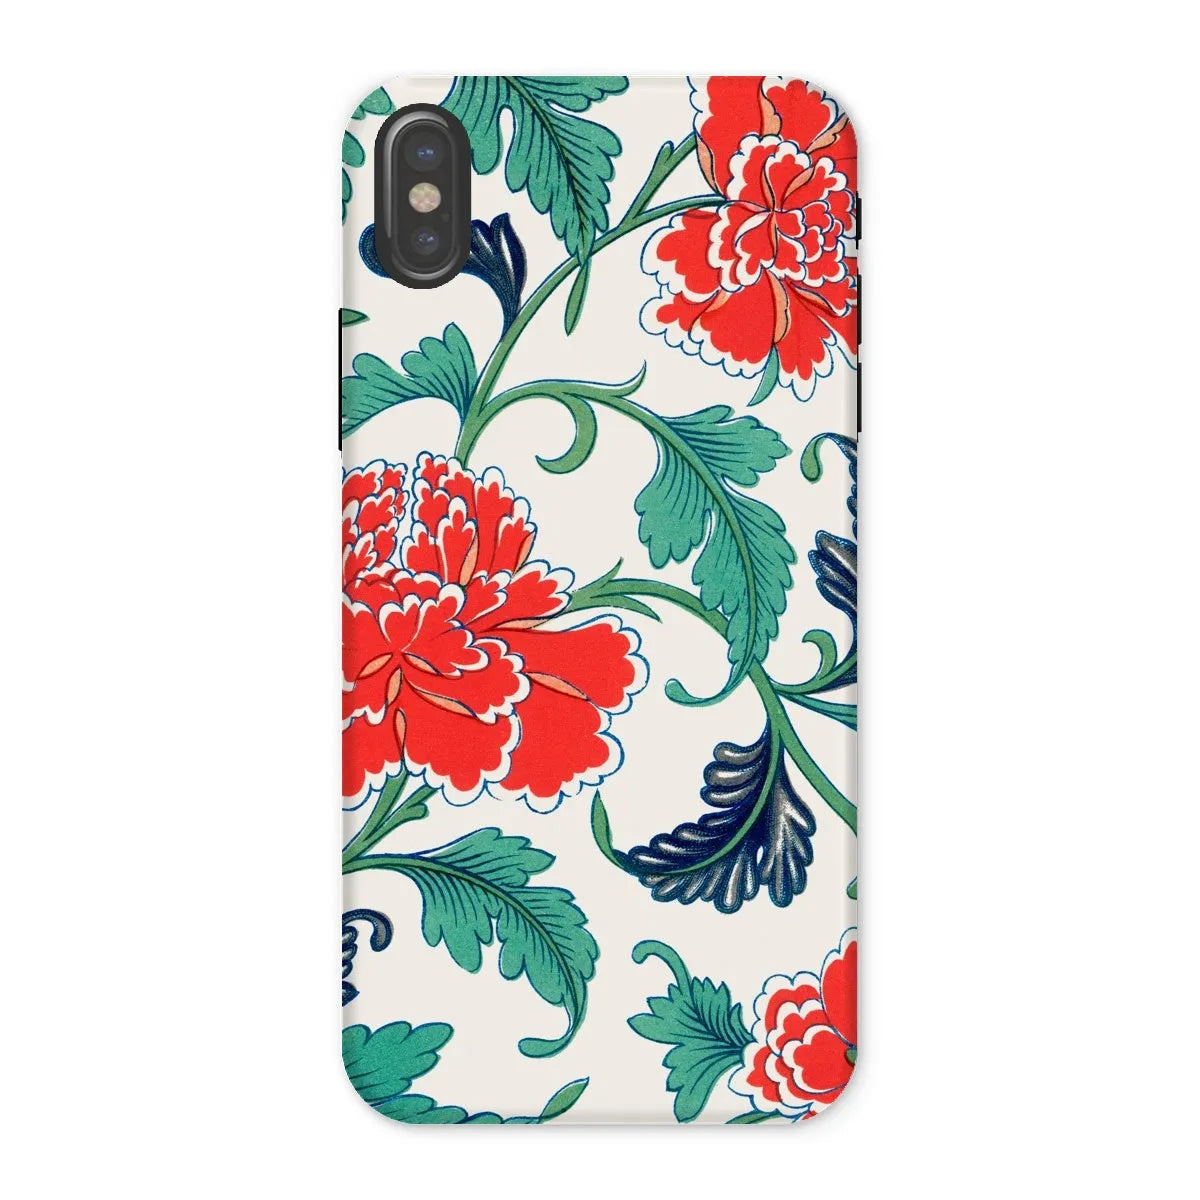 Red Floral Chinese Aesthetic Pattern Phone Case - Owen Jones - Iphone x / Matte - Mobile Phone Cases - Aesthetic Art